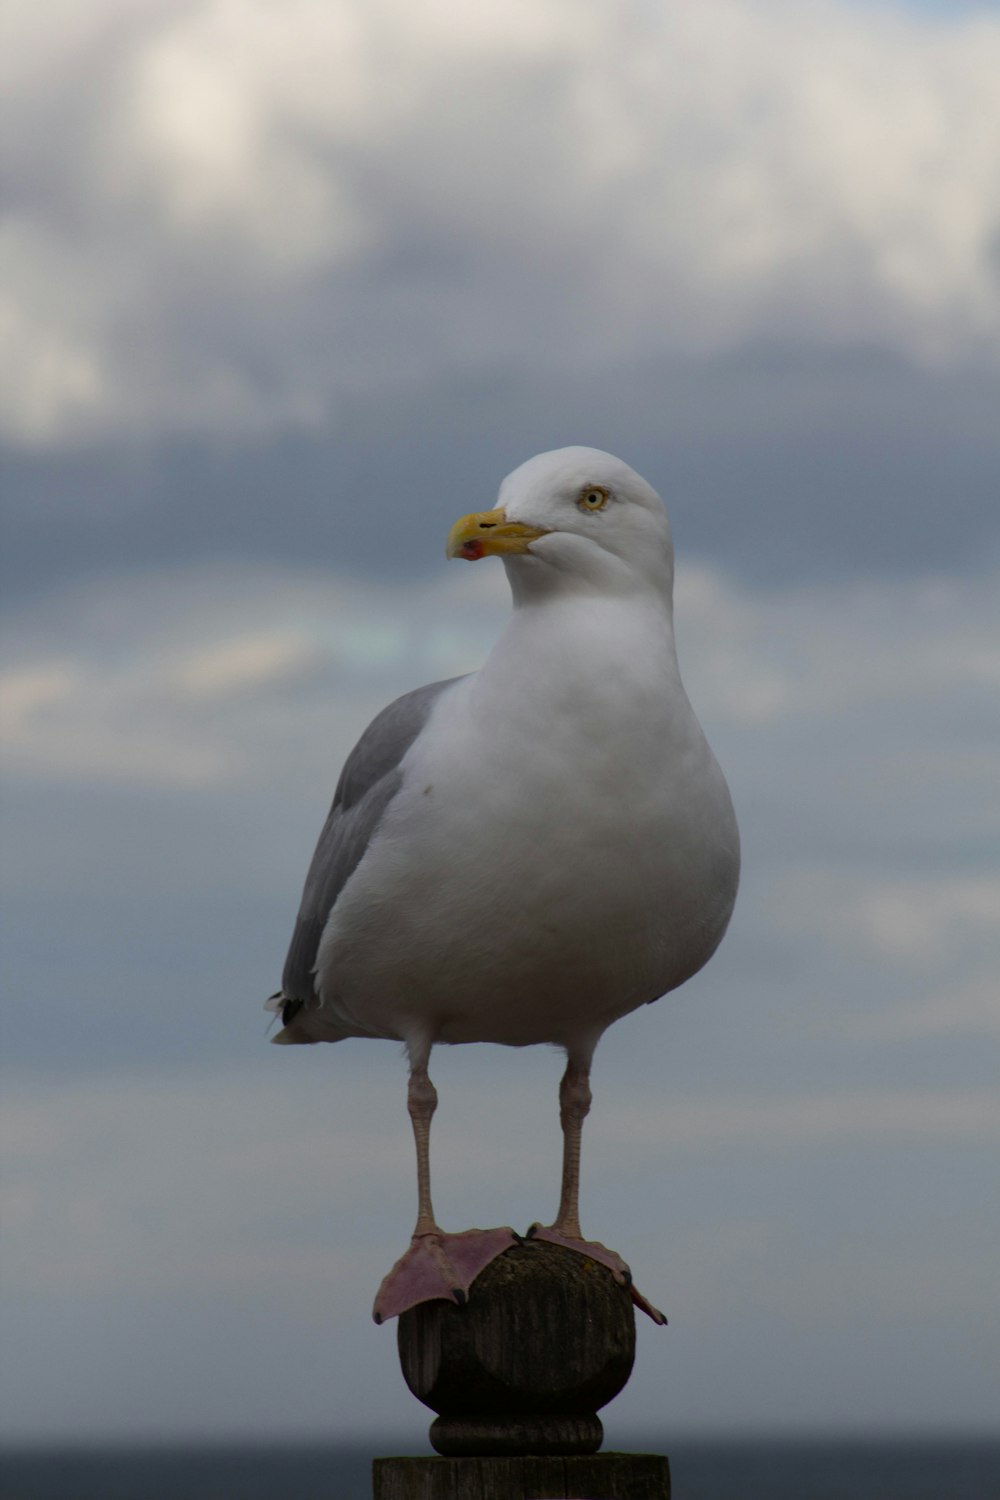 a seagull standing on a post on a cloudy day